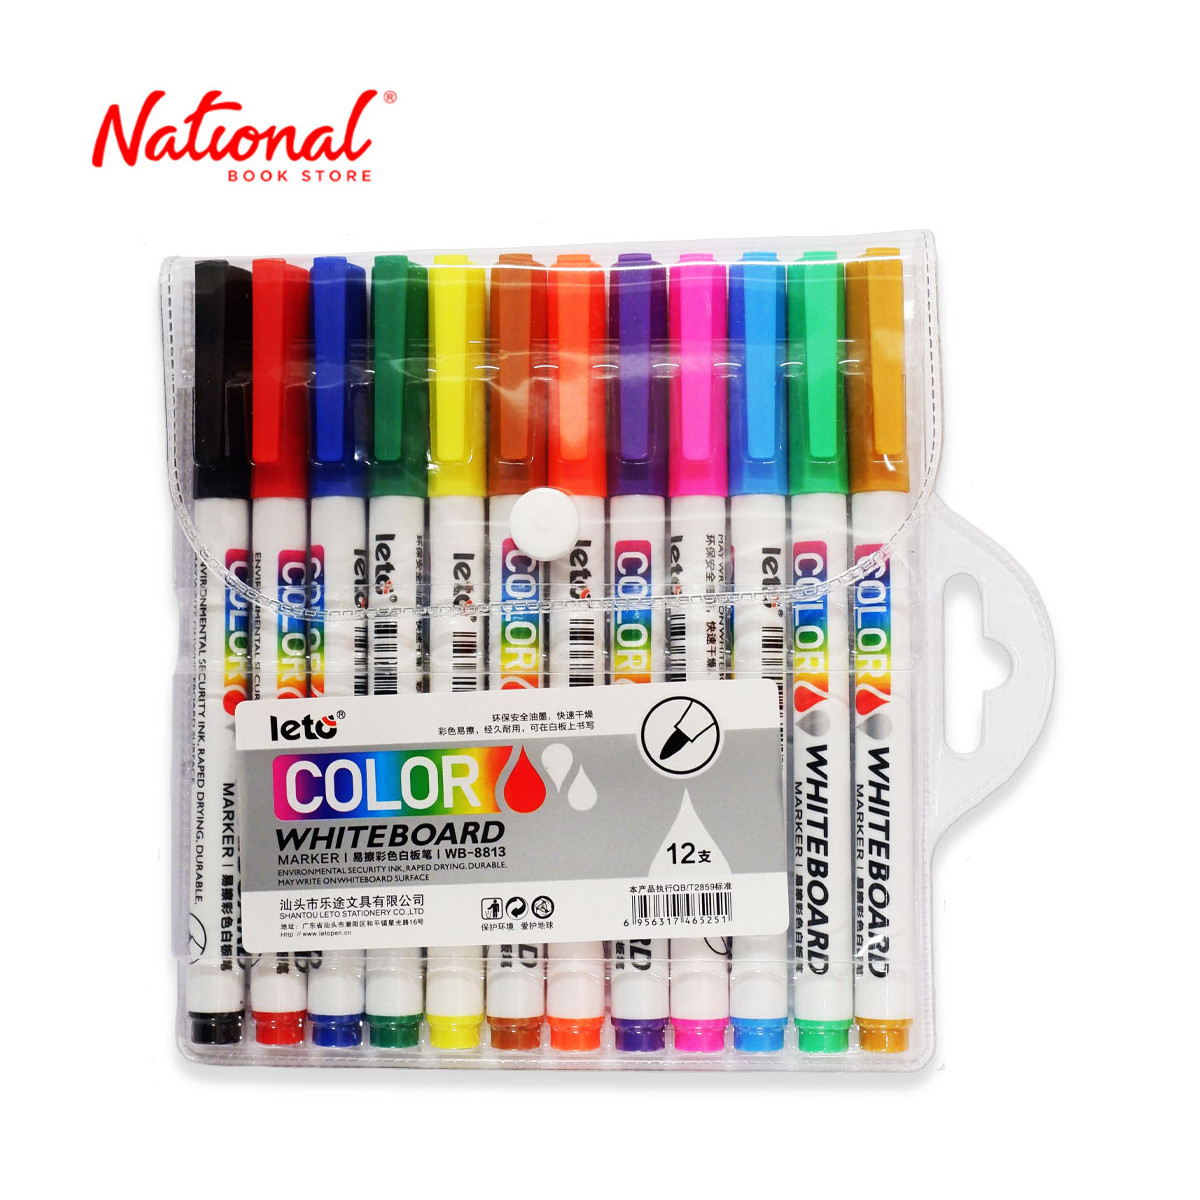 Leto Color Whiteboard Marker Slim Assorted 12's WB-8813-12 - School & Office - Writing Supplies